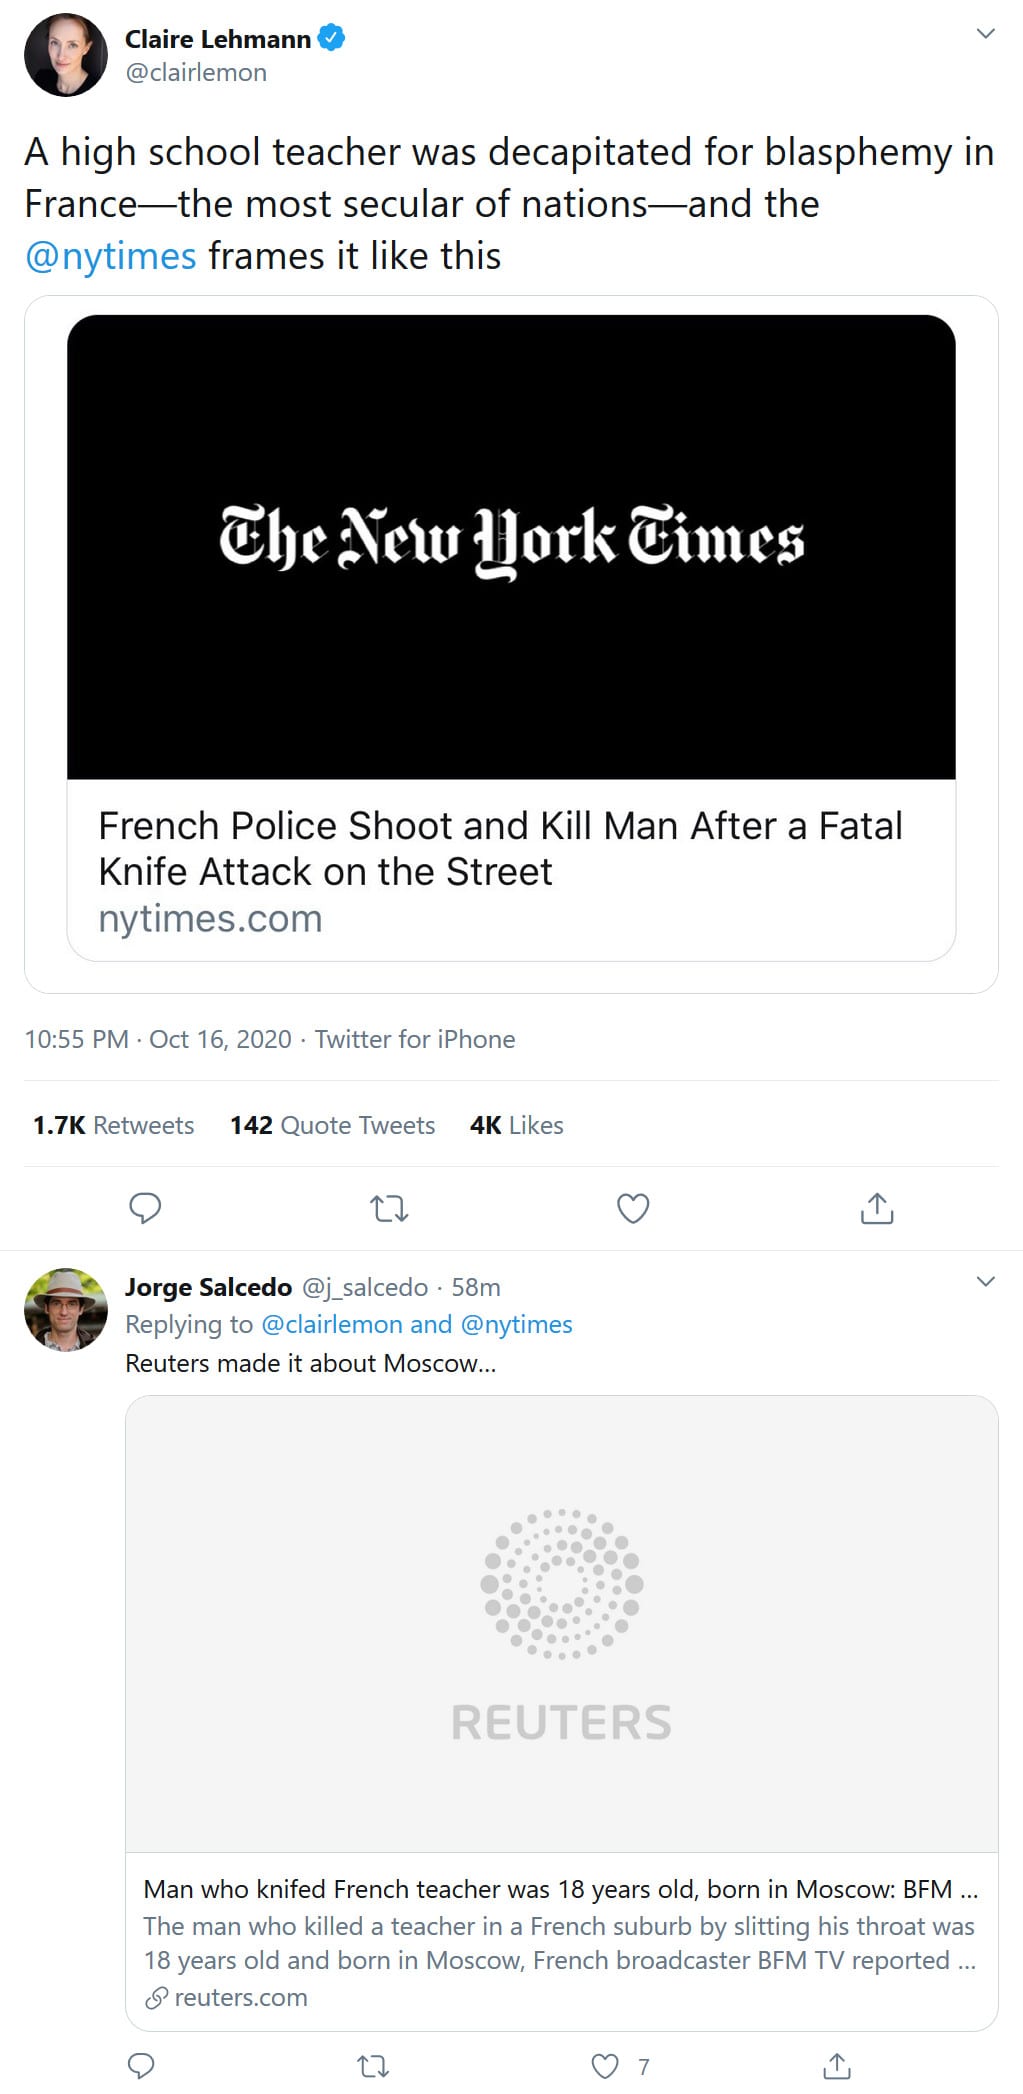 nyt_reuters_french_knife_attack_10-17-20